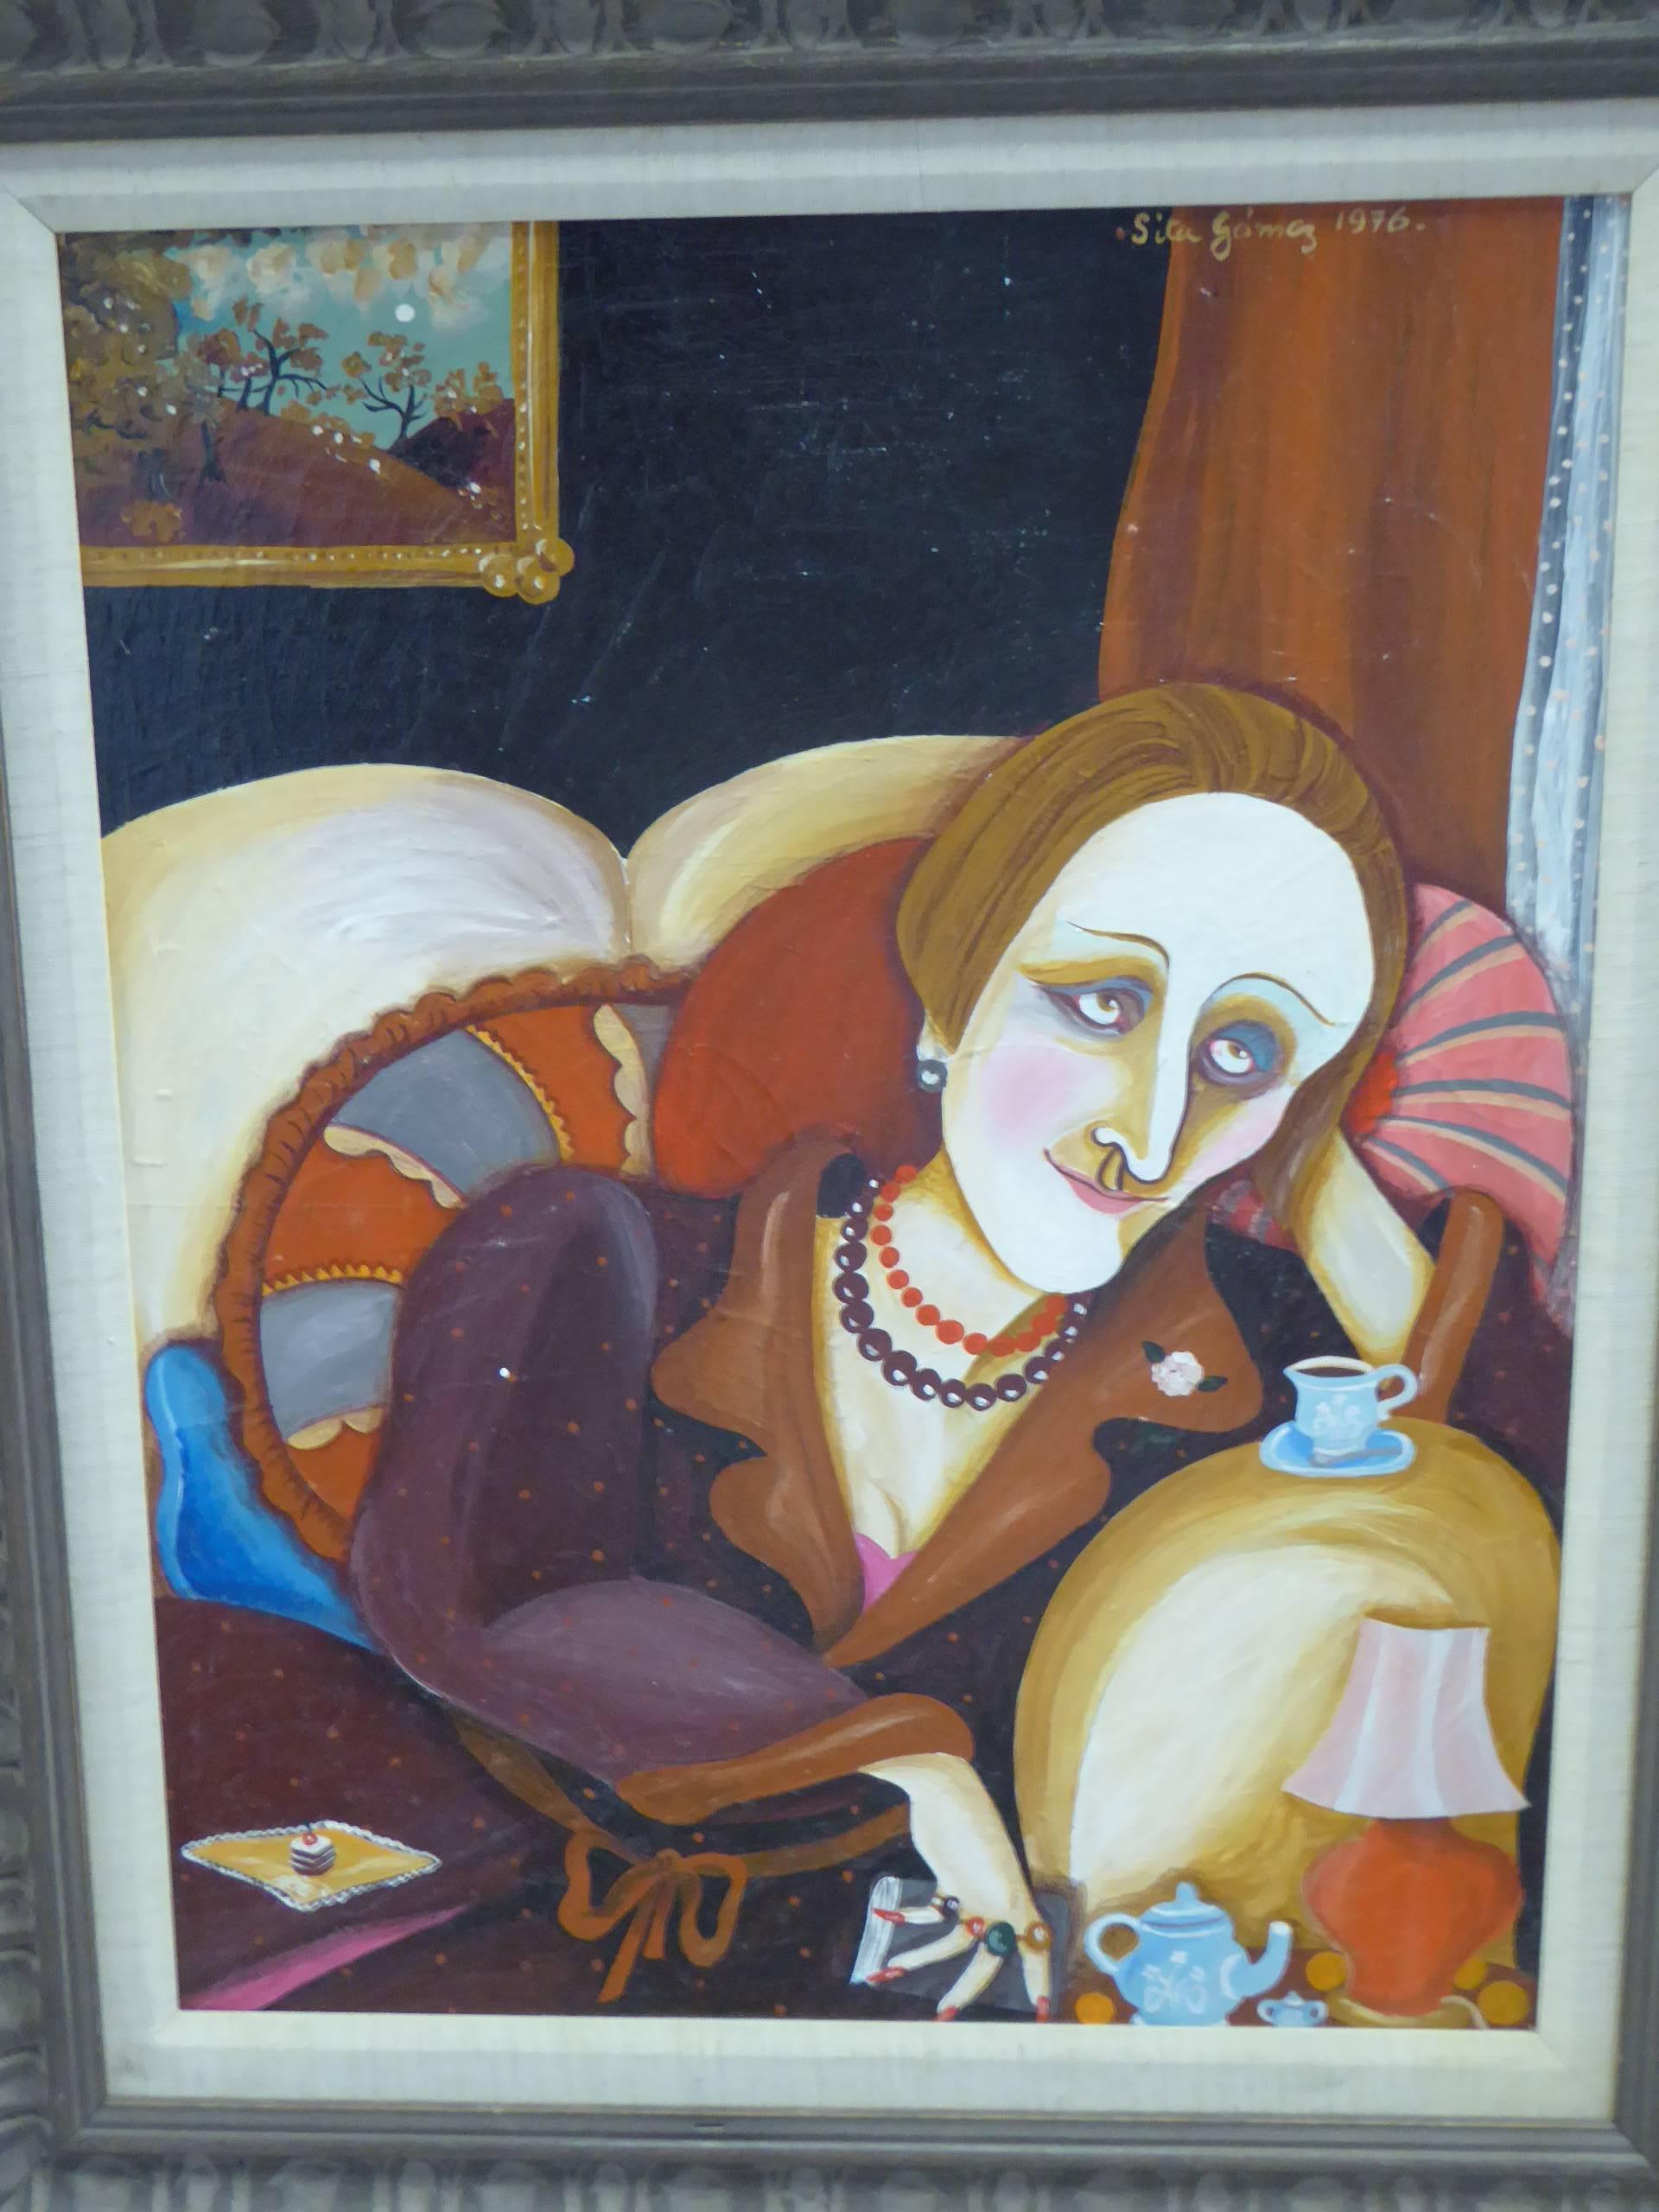 A Cuban, born in Paris in 1932, Sita Gomez de Kanelba is a renowned artist, noted for her paintings mostly of women. Here an oil on board portrait of Dame Edith Sitwell, herself a famed figure of the early 20th century in the arts and literature, a